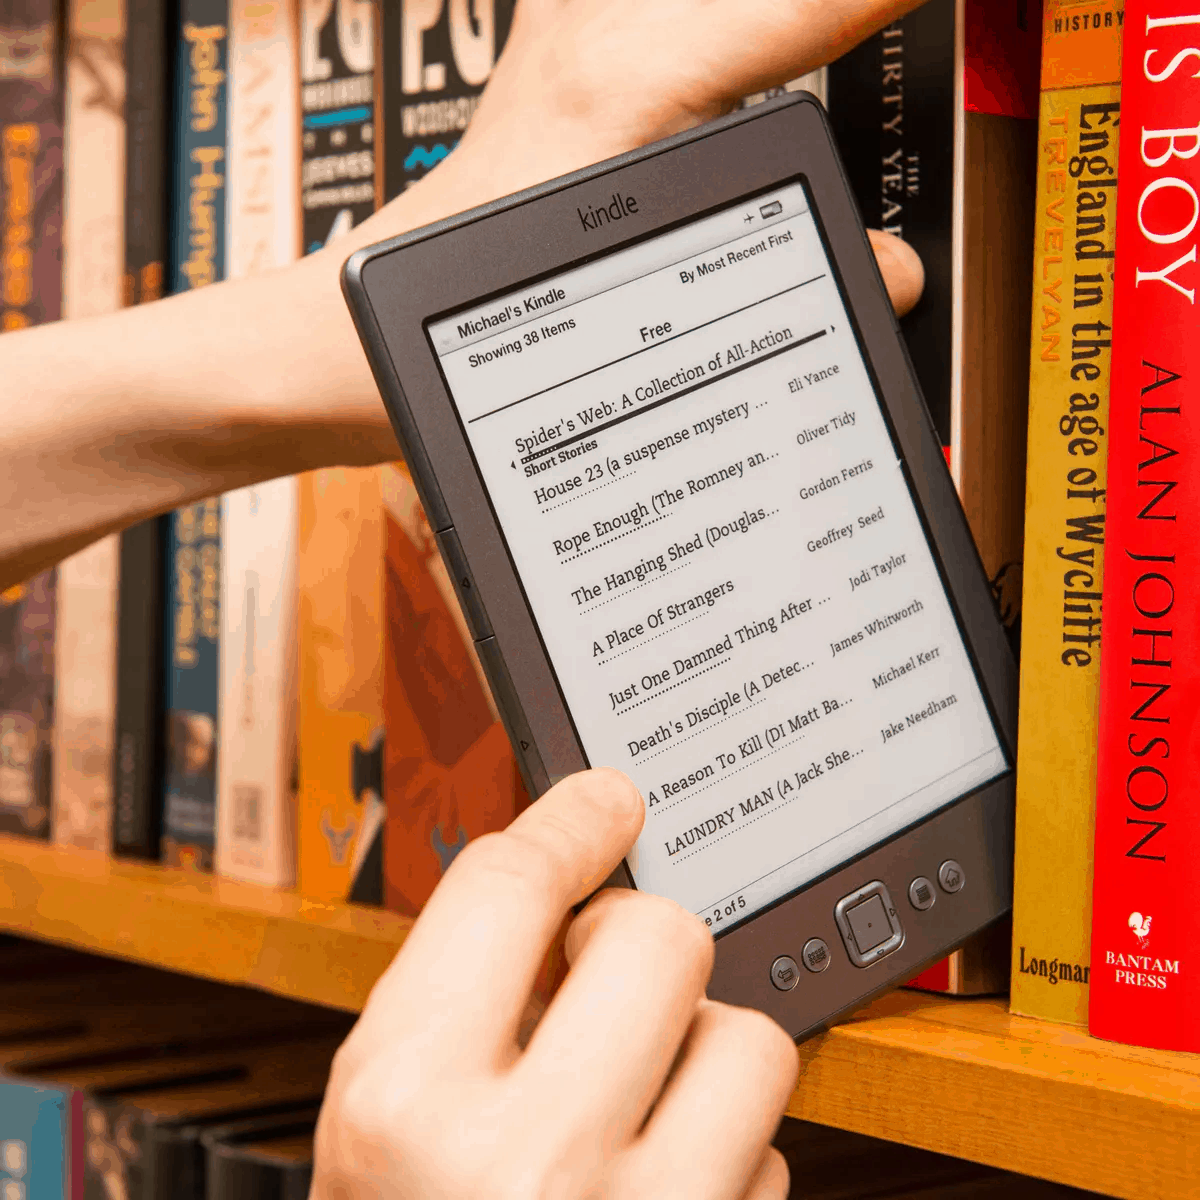 Kindle Vs Nook - Don't Buy Without Reading This Comparison 1